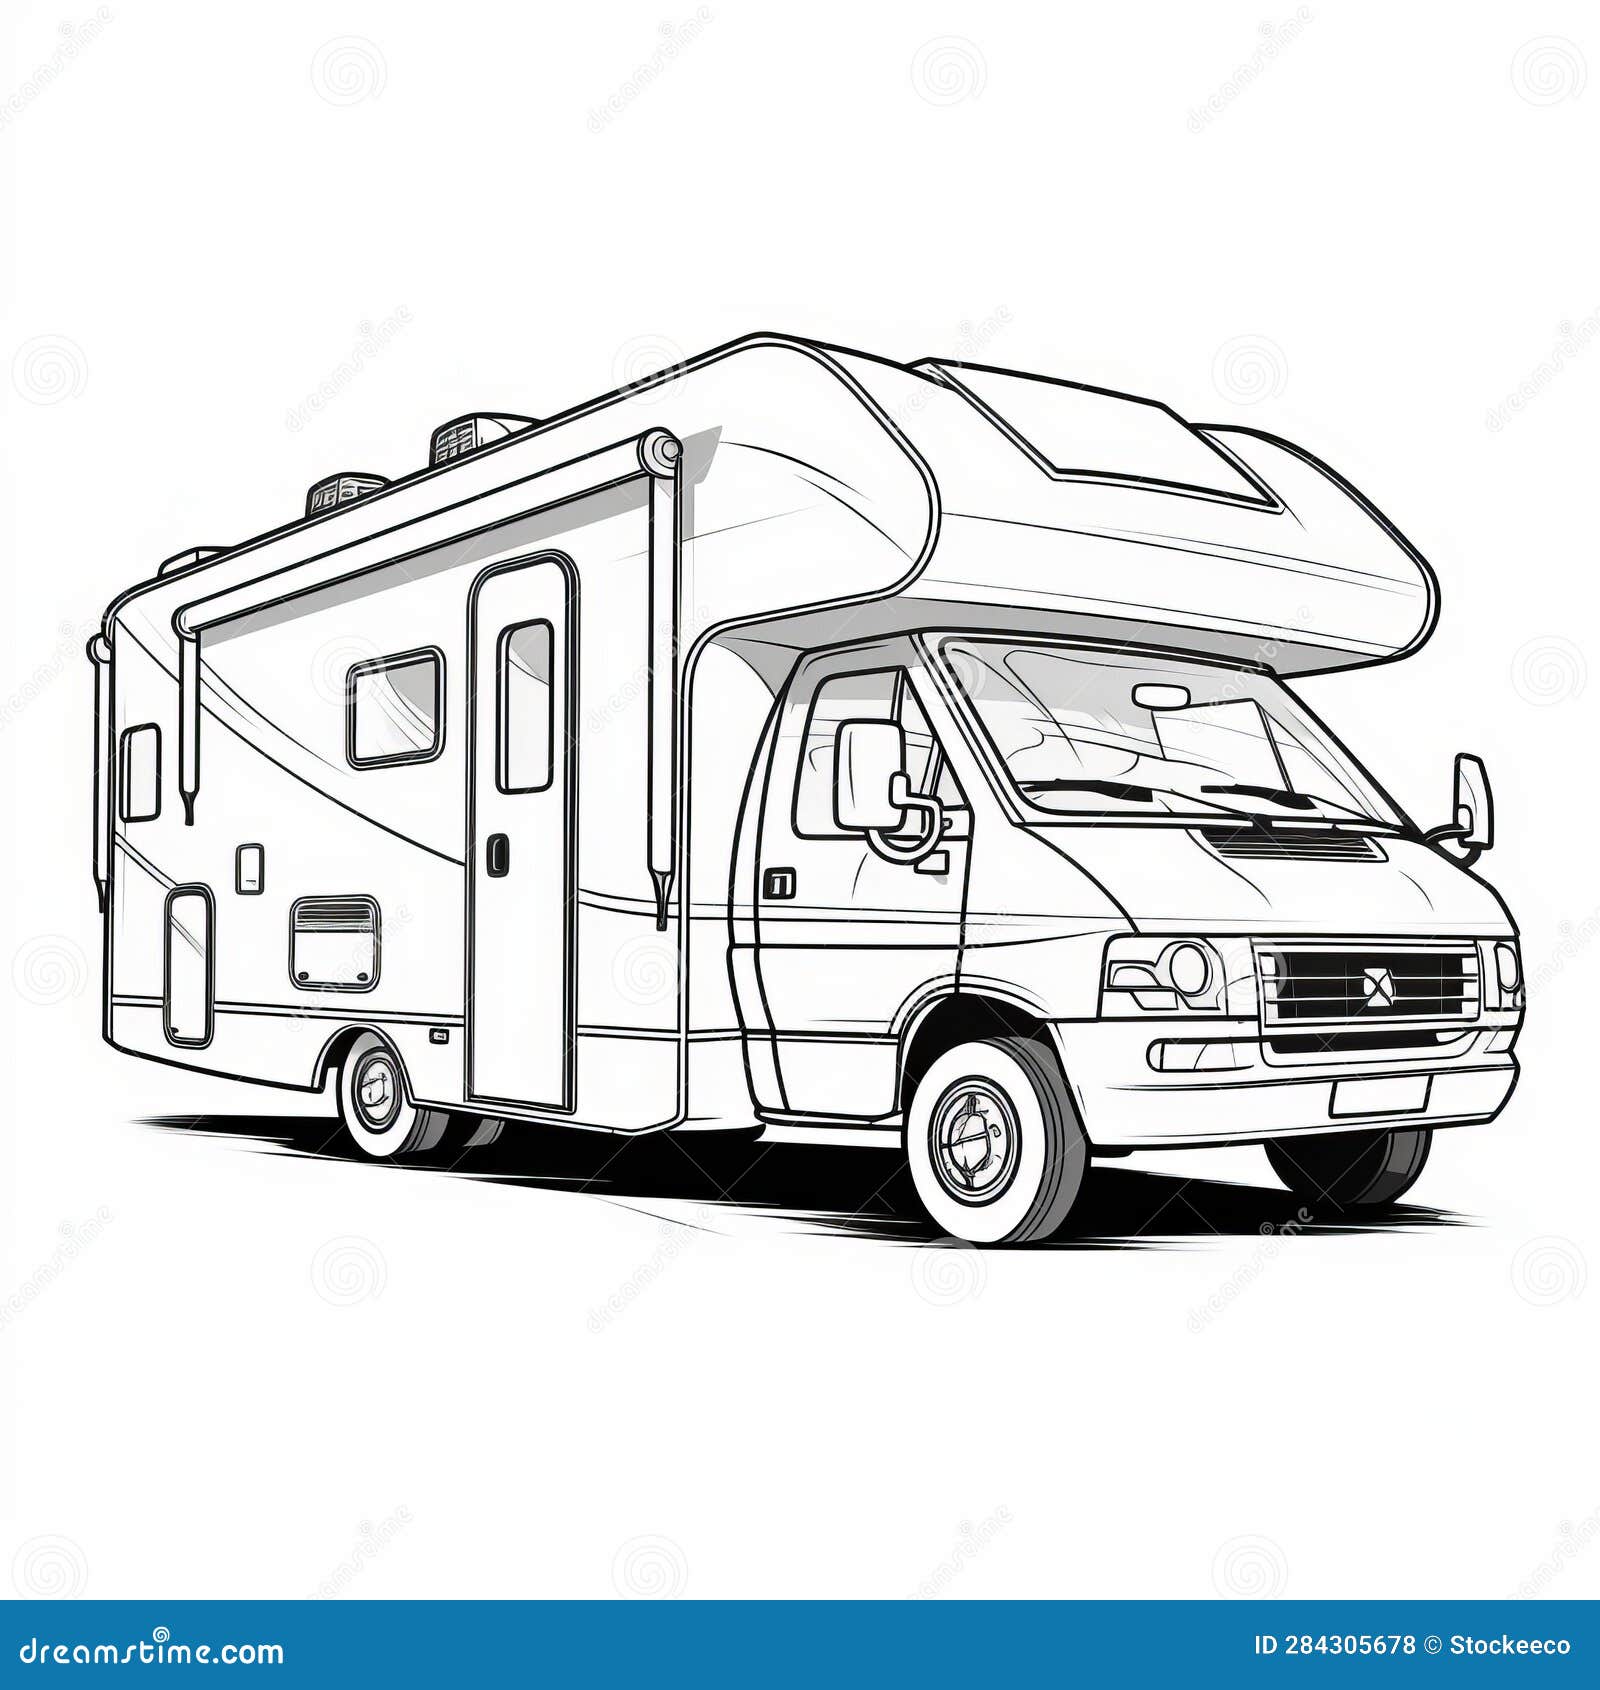 Rv Trailer Coloring Pages: Realistic Portrayal with Fluid and Dynamic ...